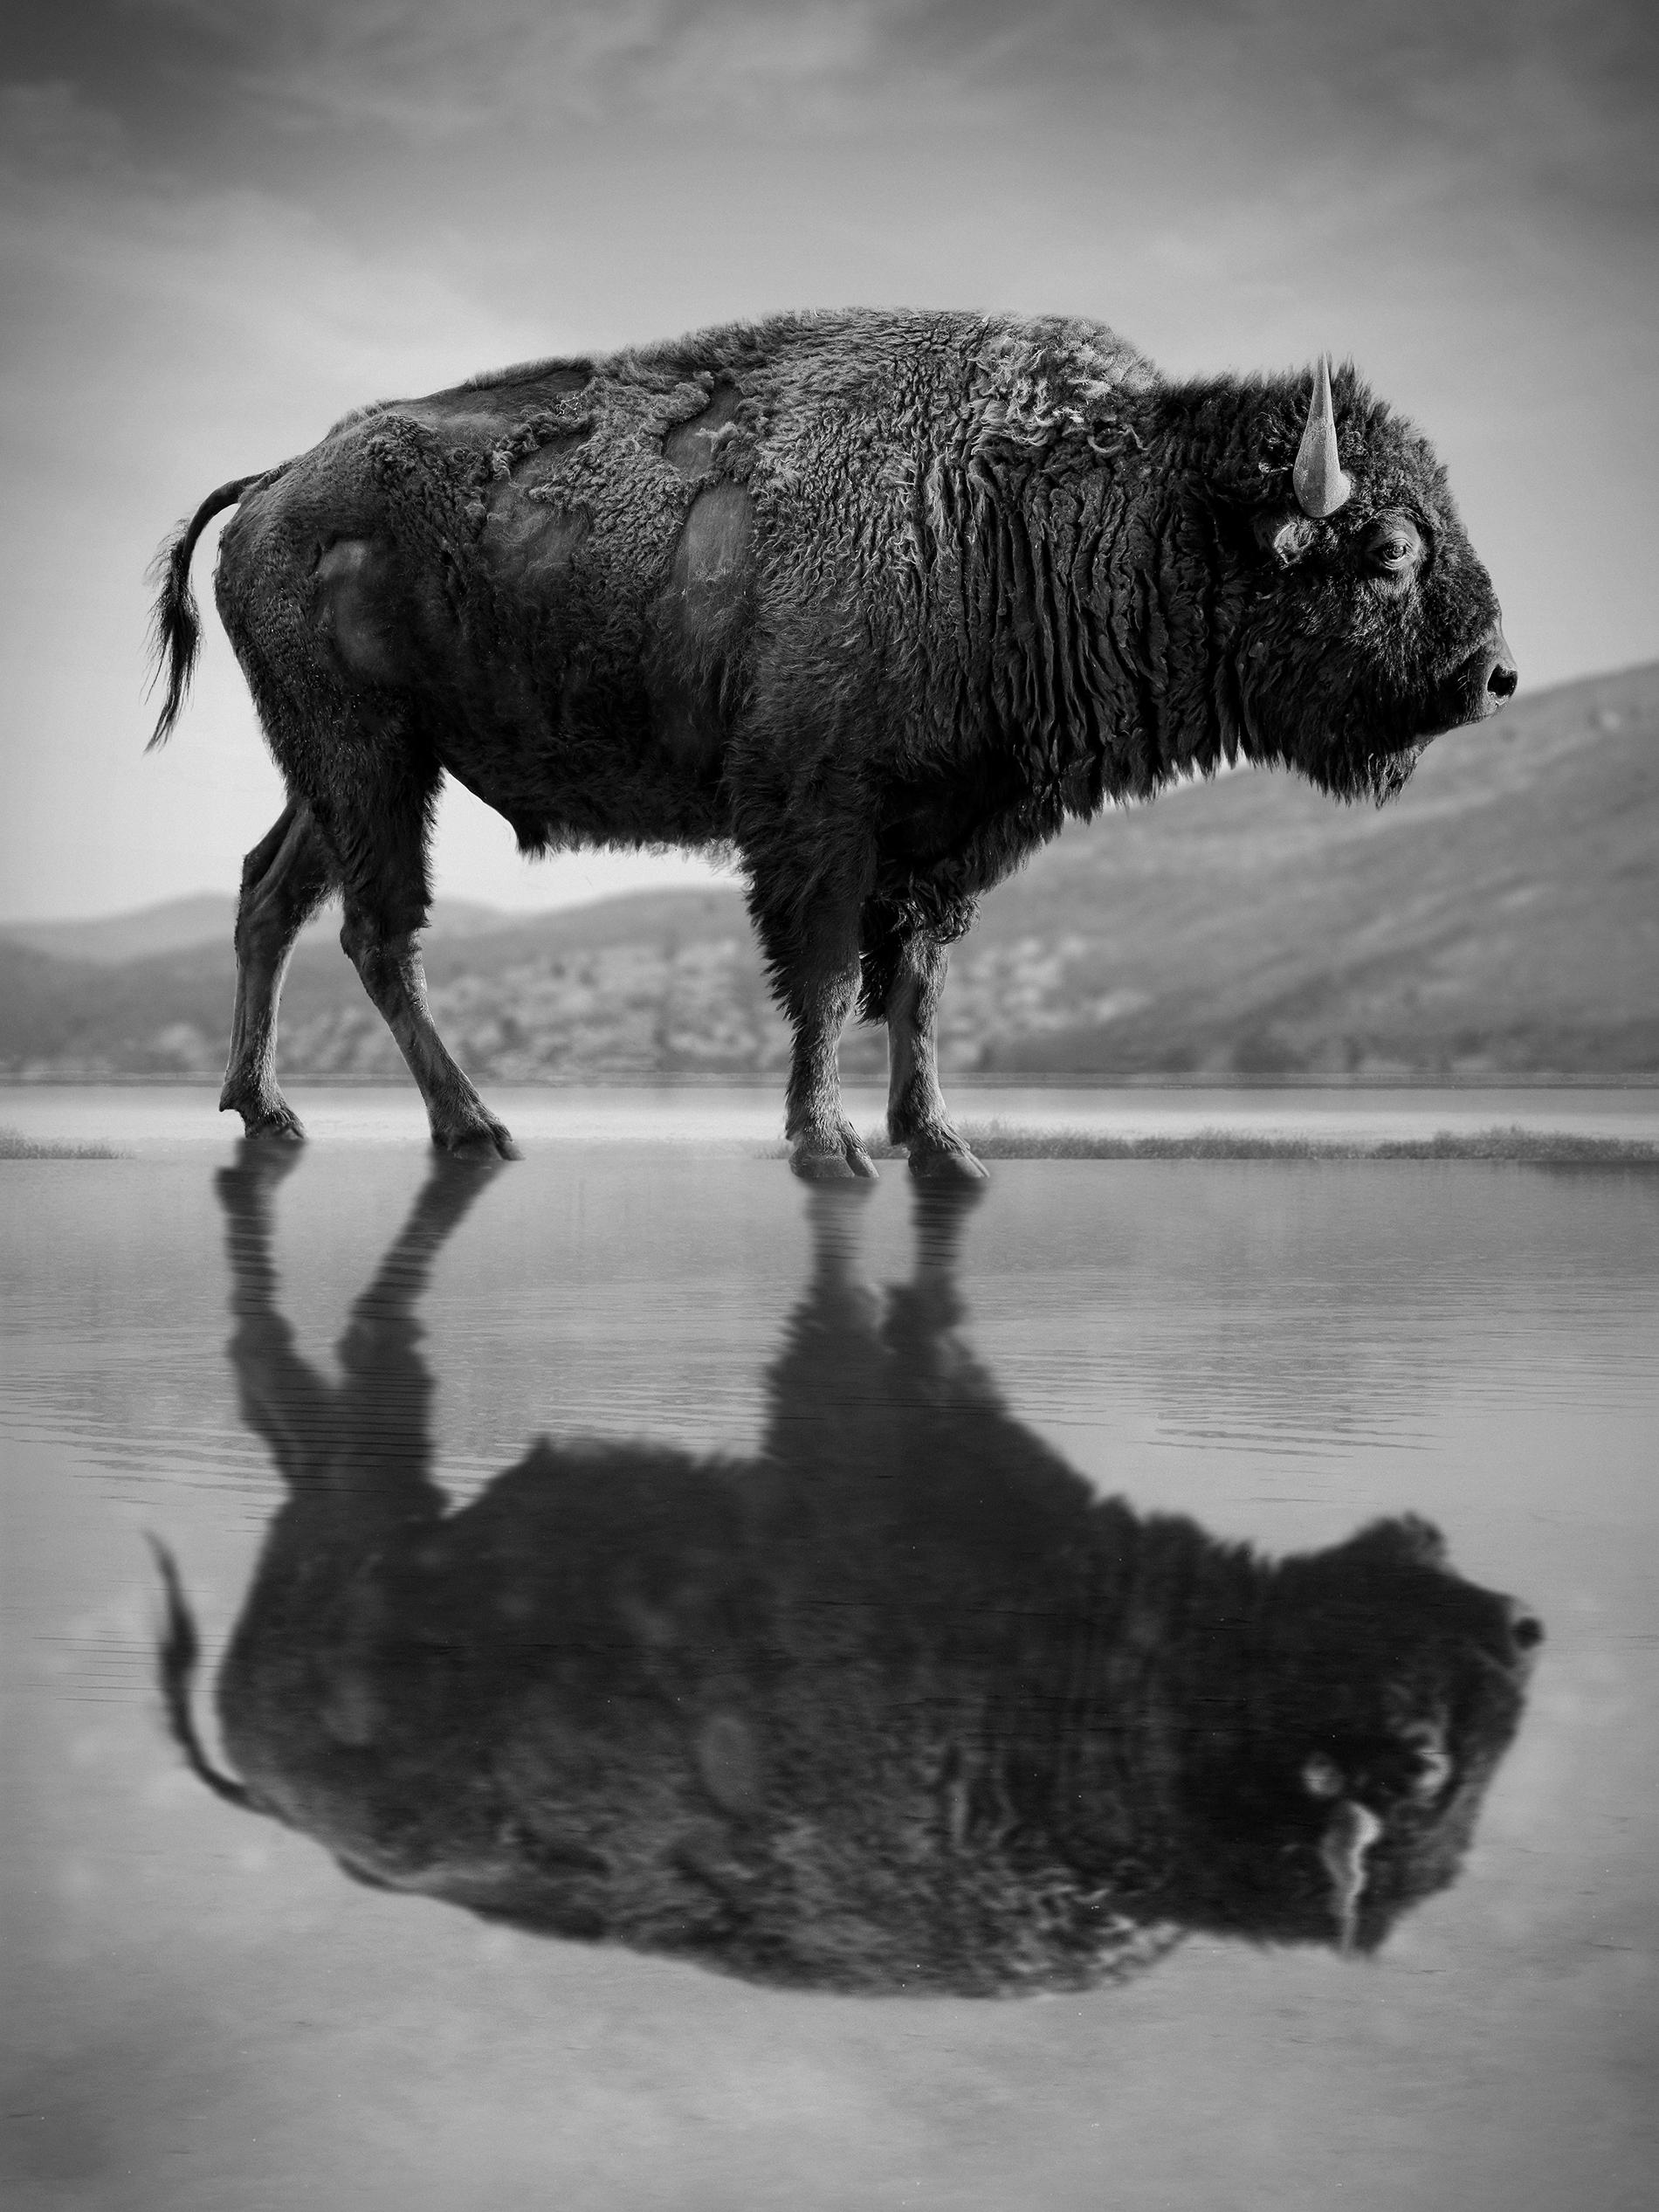 Shane Russeck Black and White Photograph - "Old World" 40x60  Black & White Photography Bison Buffalo Fine Art Photograph